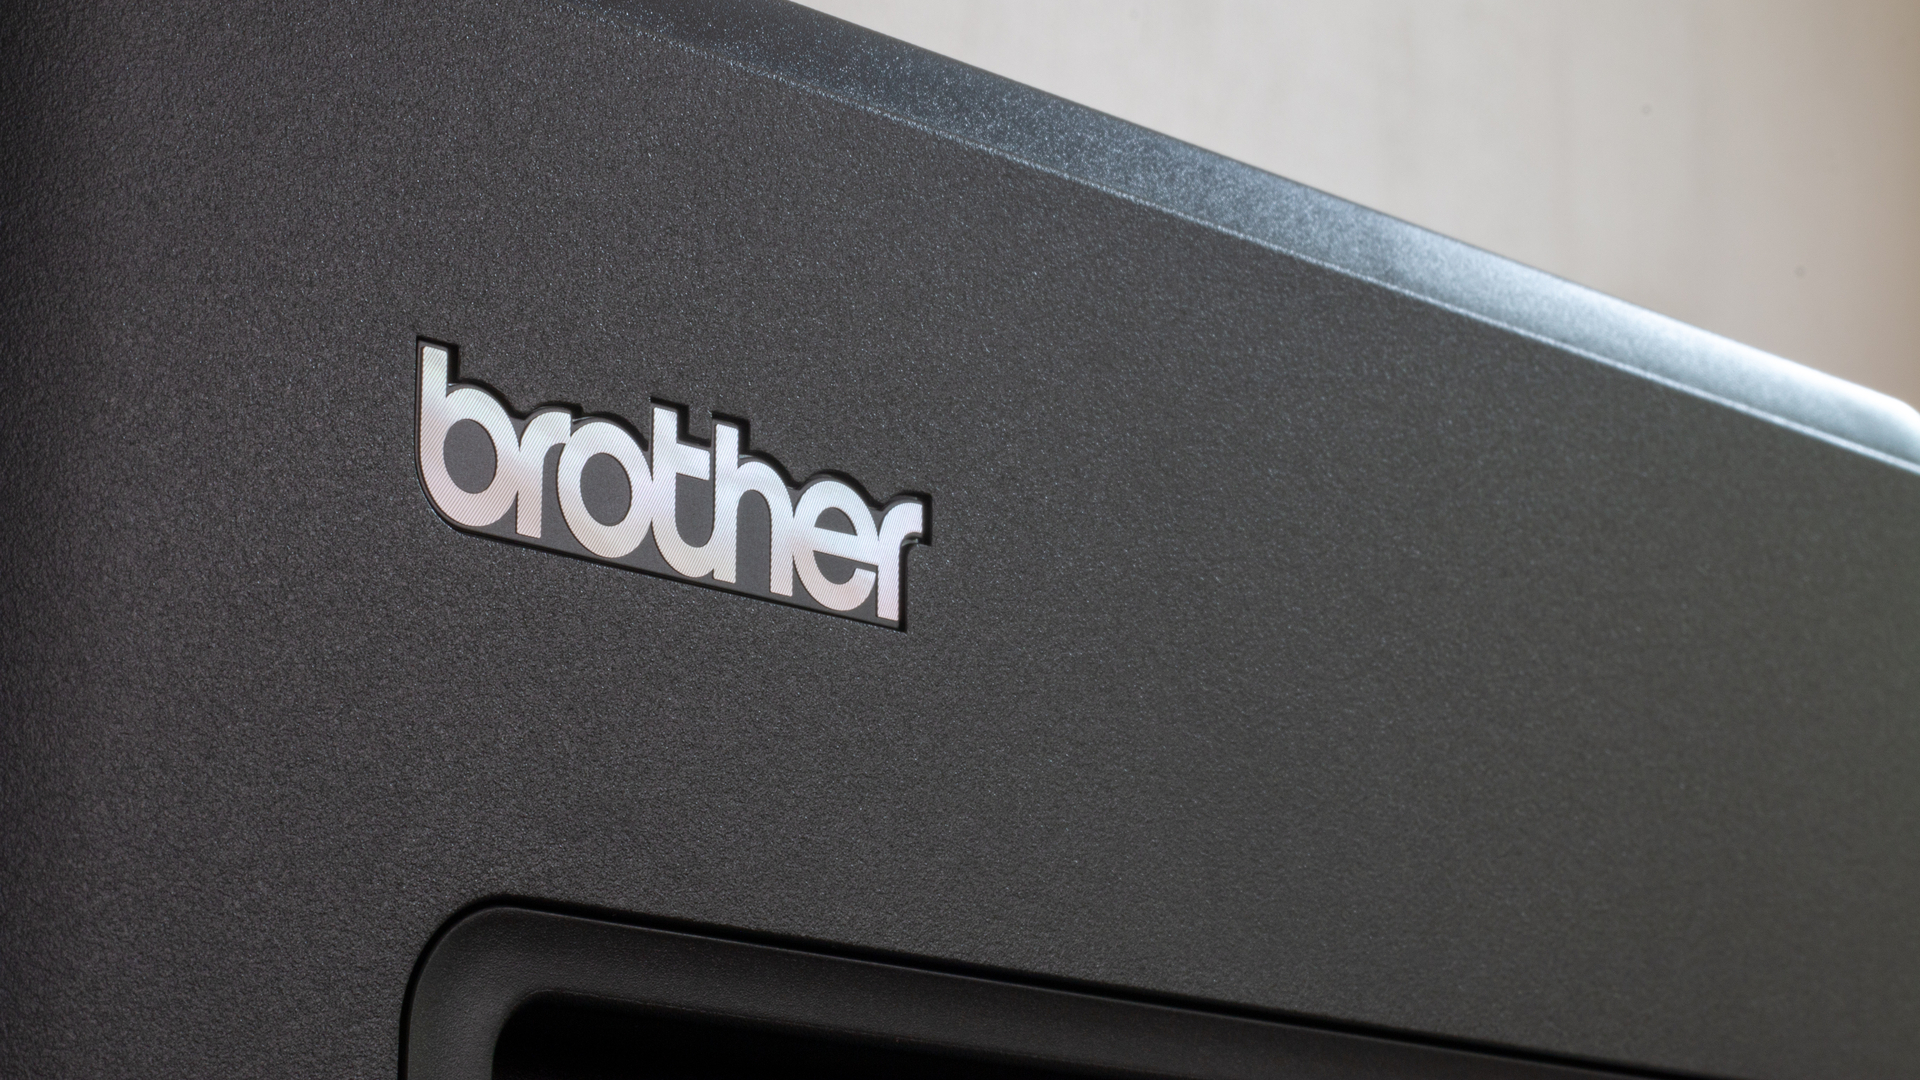 Brother MFC-J1010DW [Review 2024] 